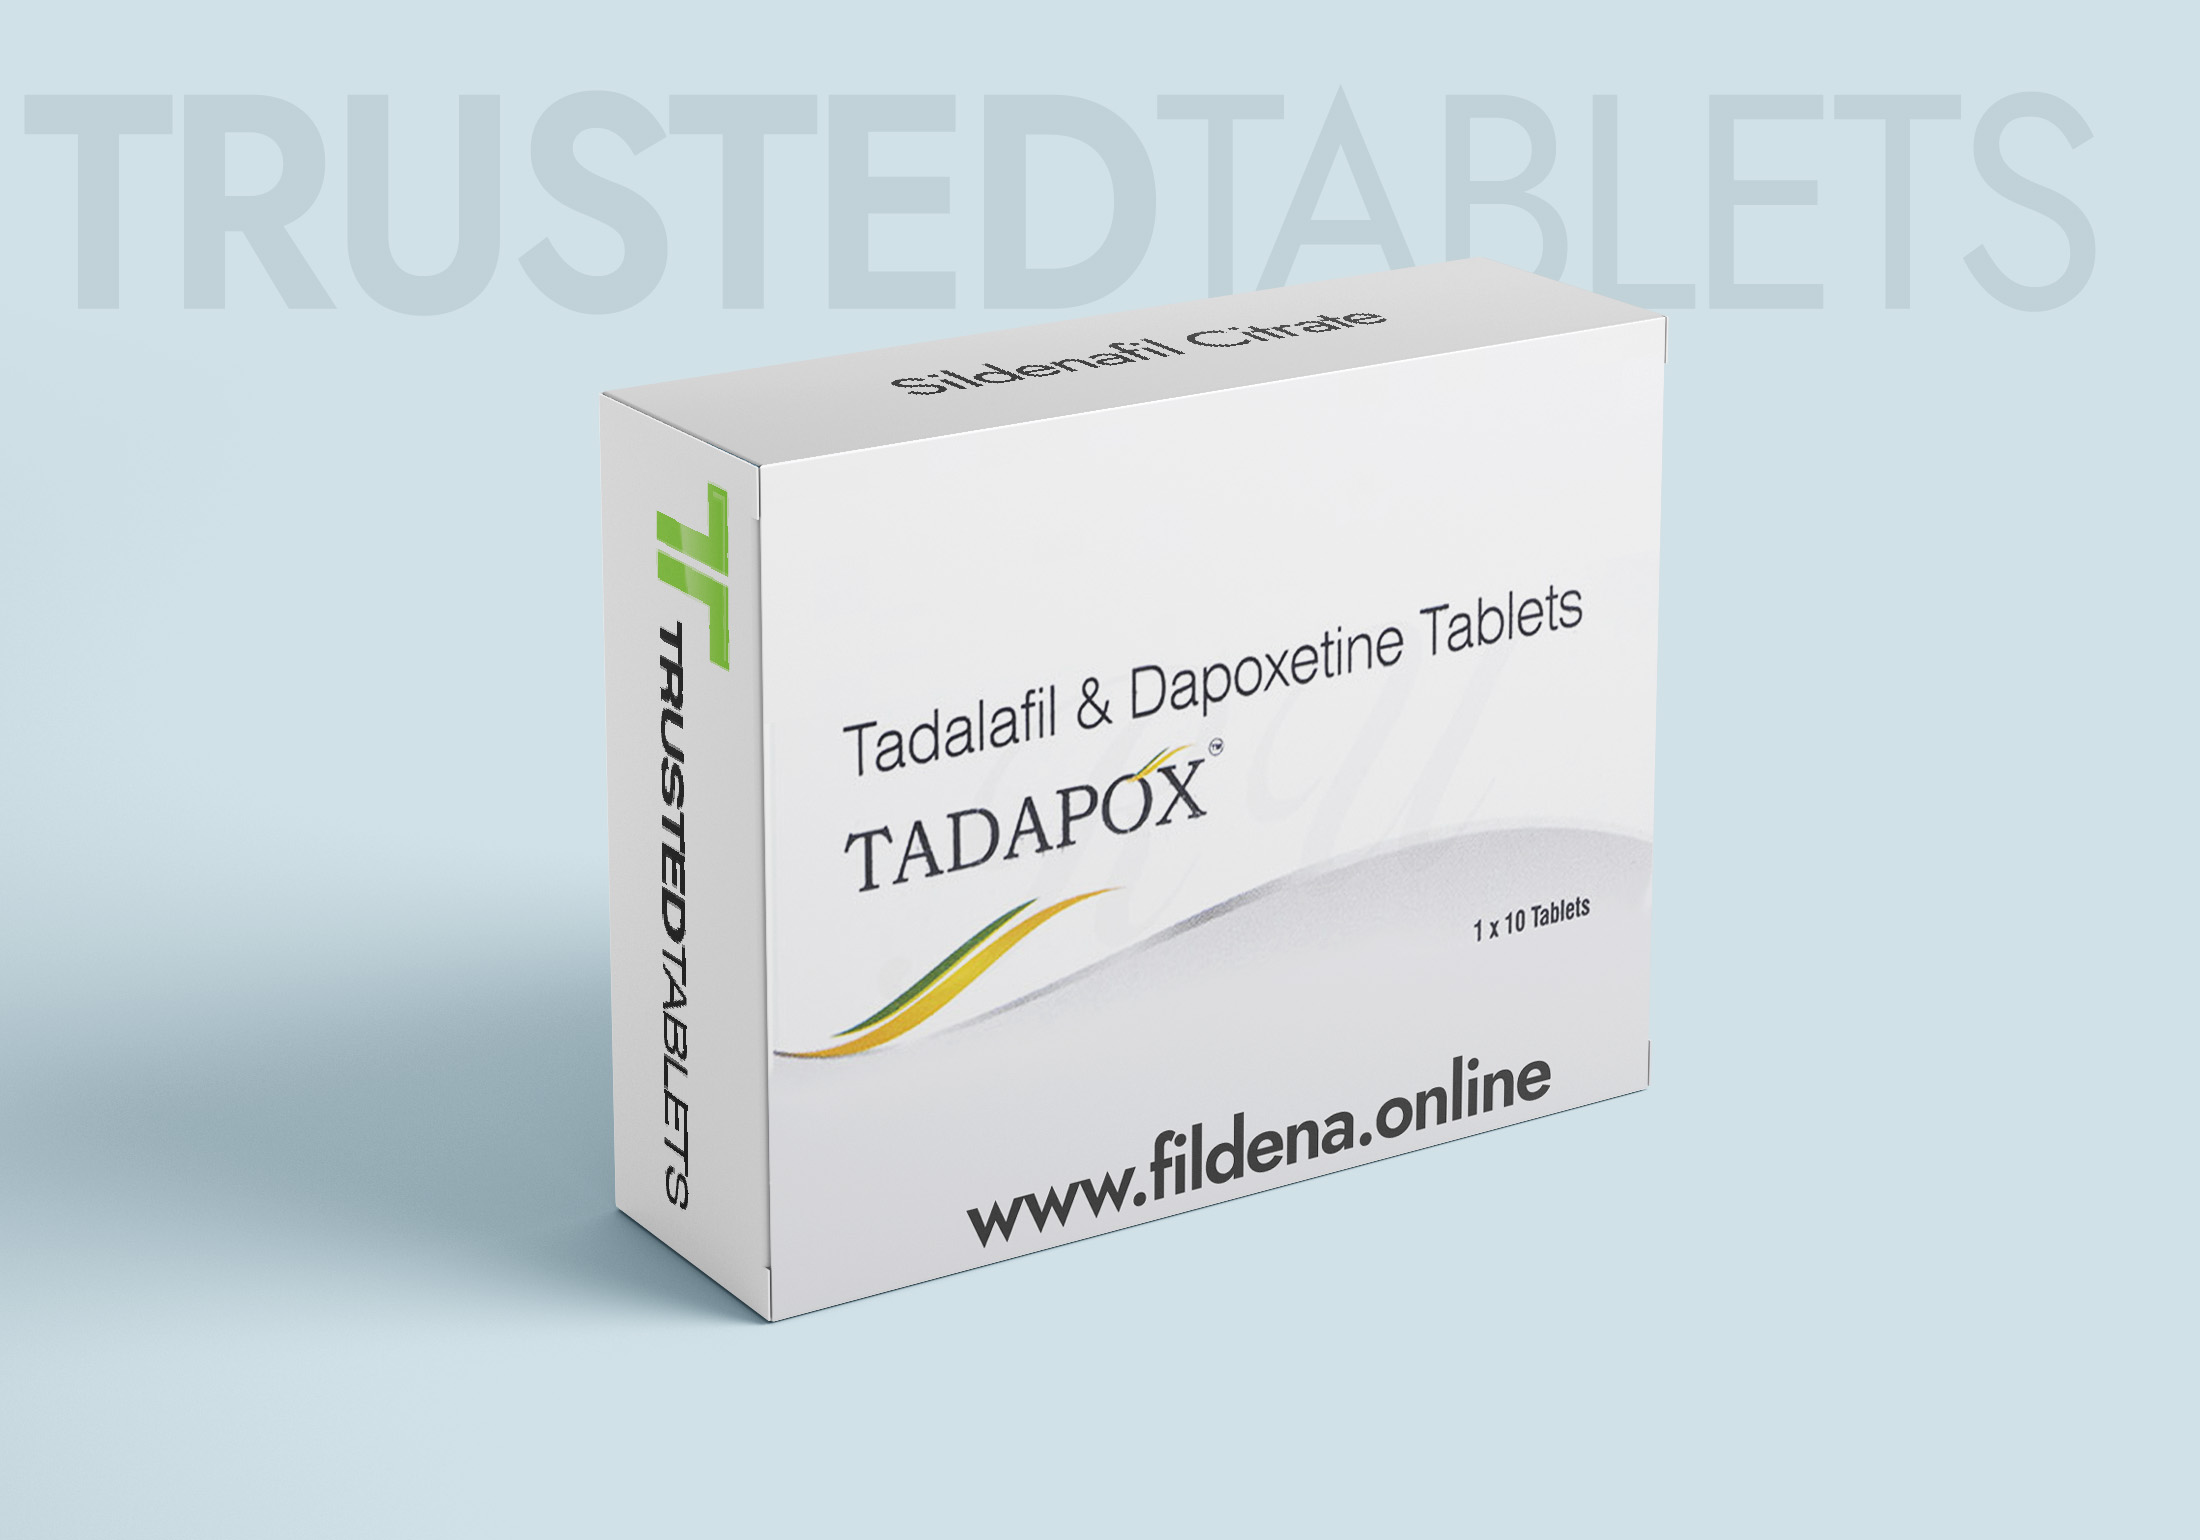 Tadapox TrustedTablets